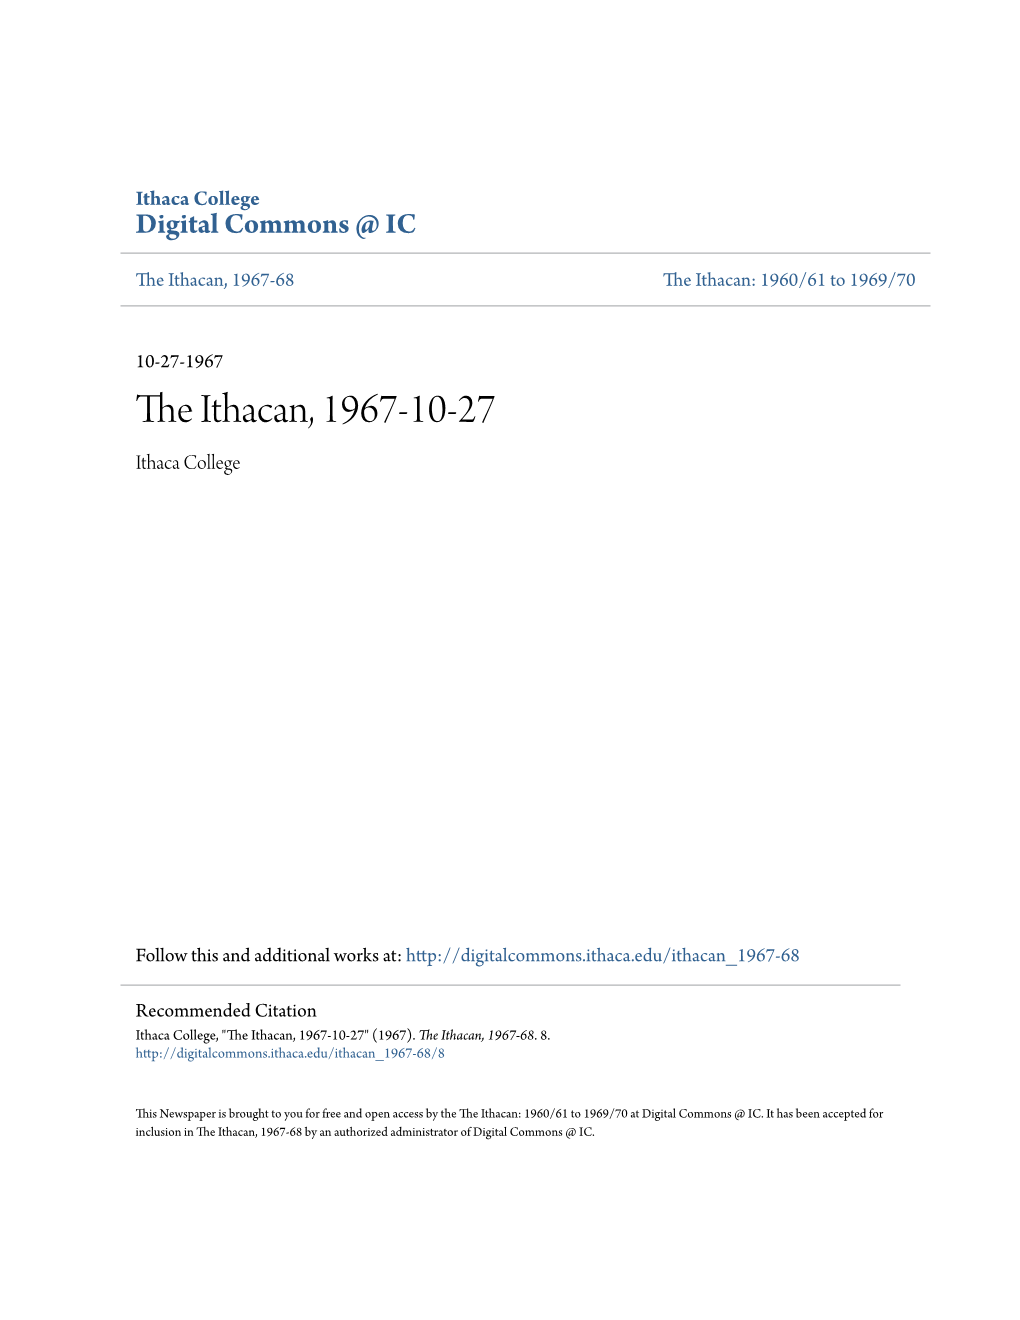 The Ithacan, 1967-10-27